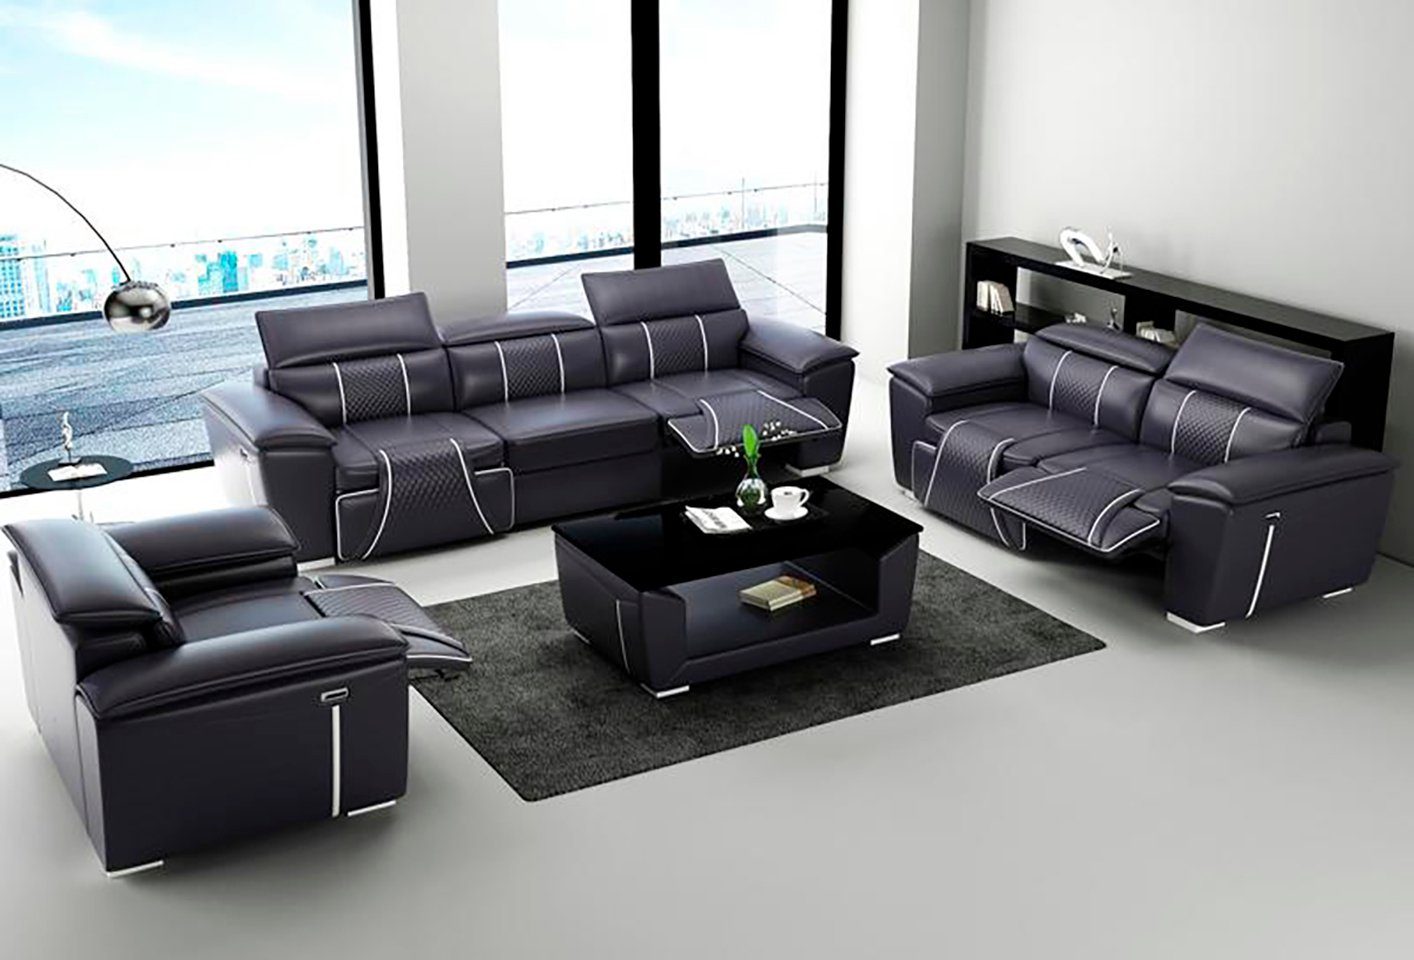 JVmoebel Sofa Multifunktions Couch Relax Sofagarnitur Polster Sofa 3+2+1 Sitzer, Made in Europe